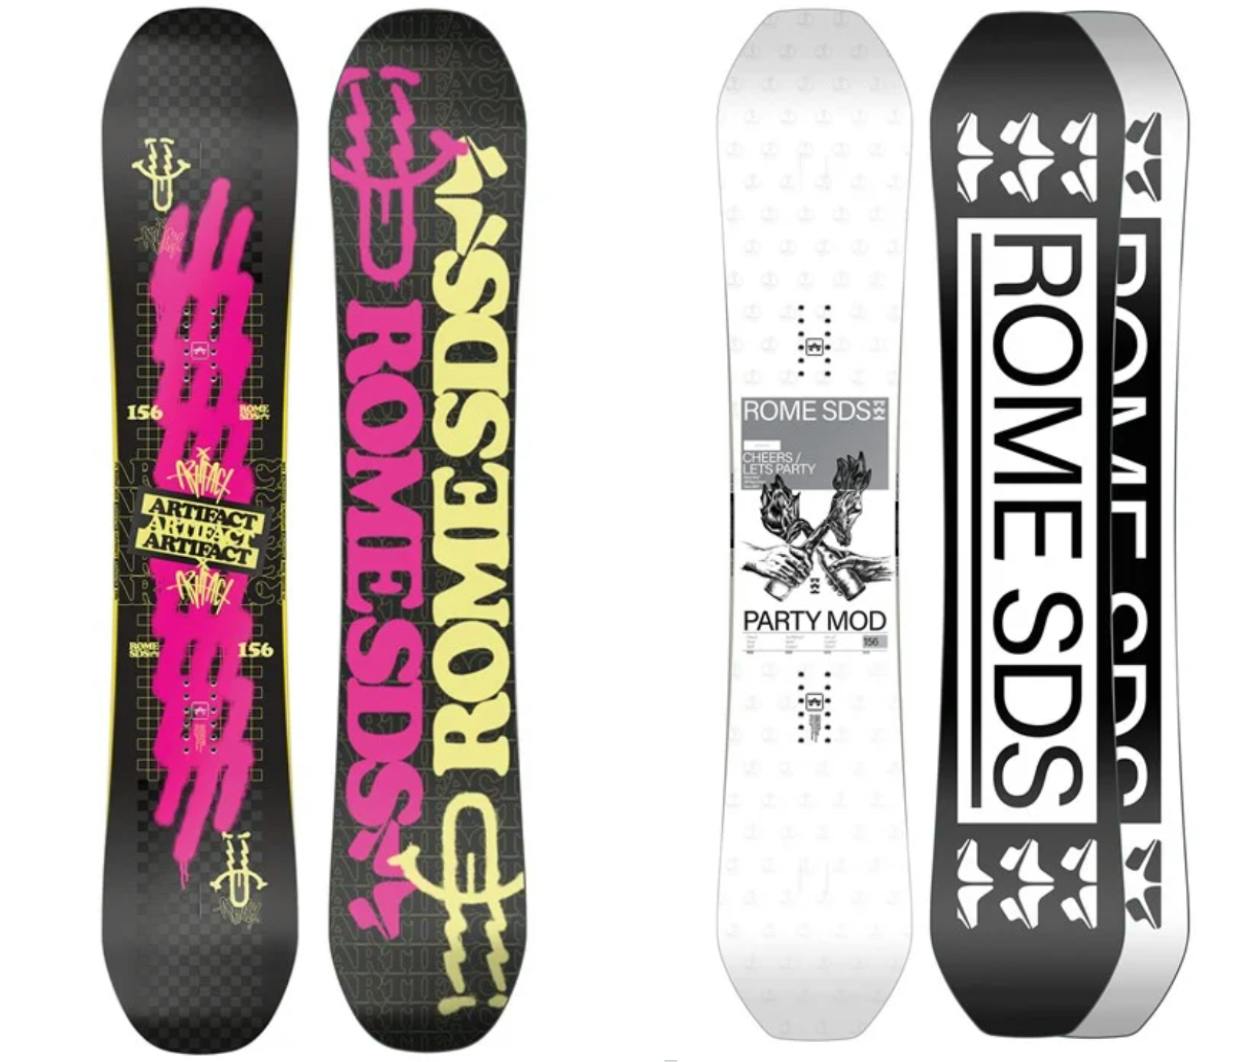 The Rome Artifact snowboard (left) and the Rome Party Mod snowboard (right).